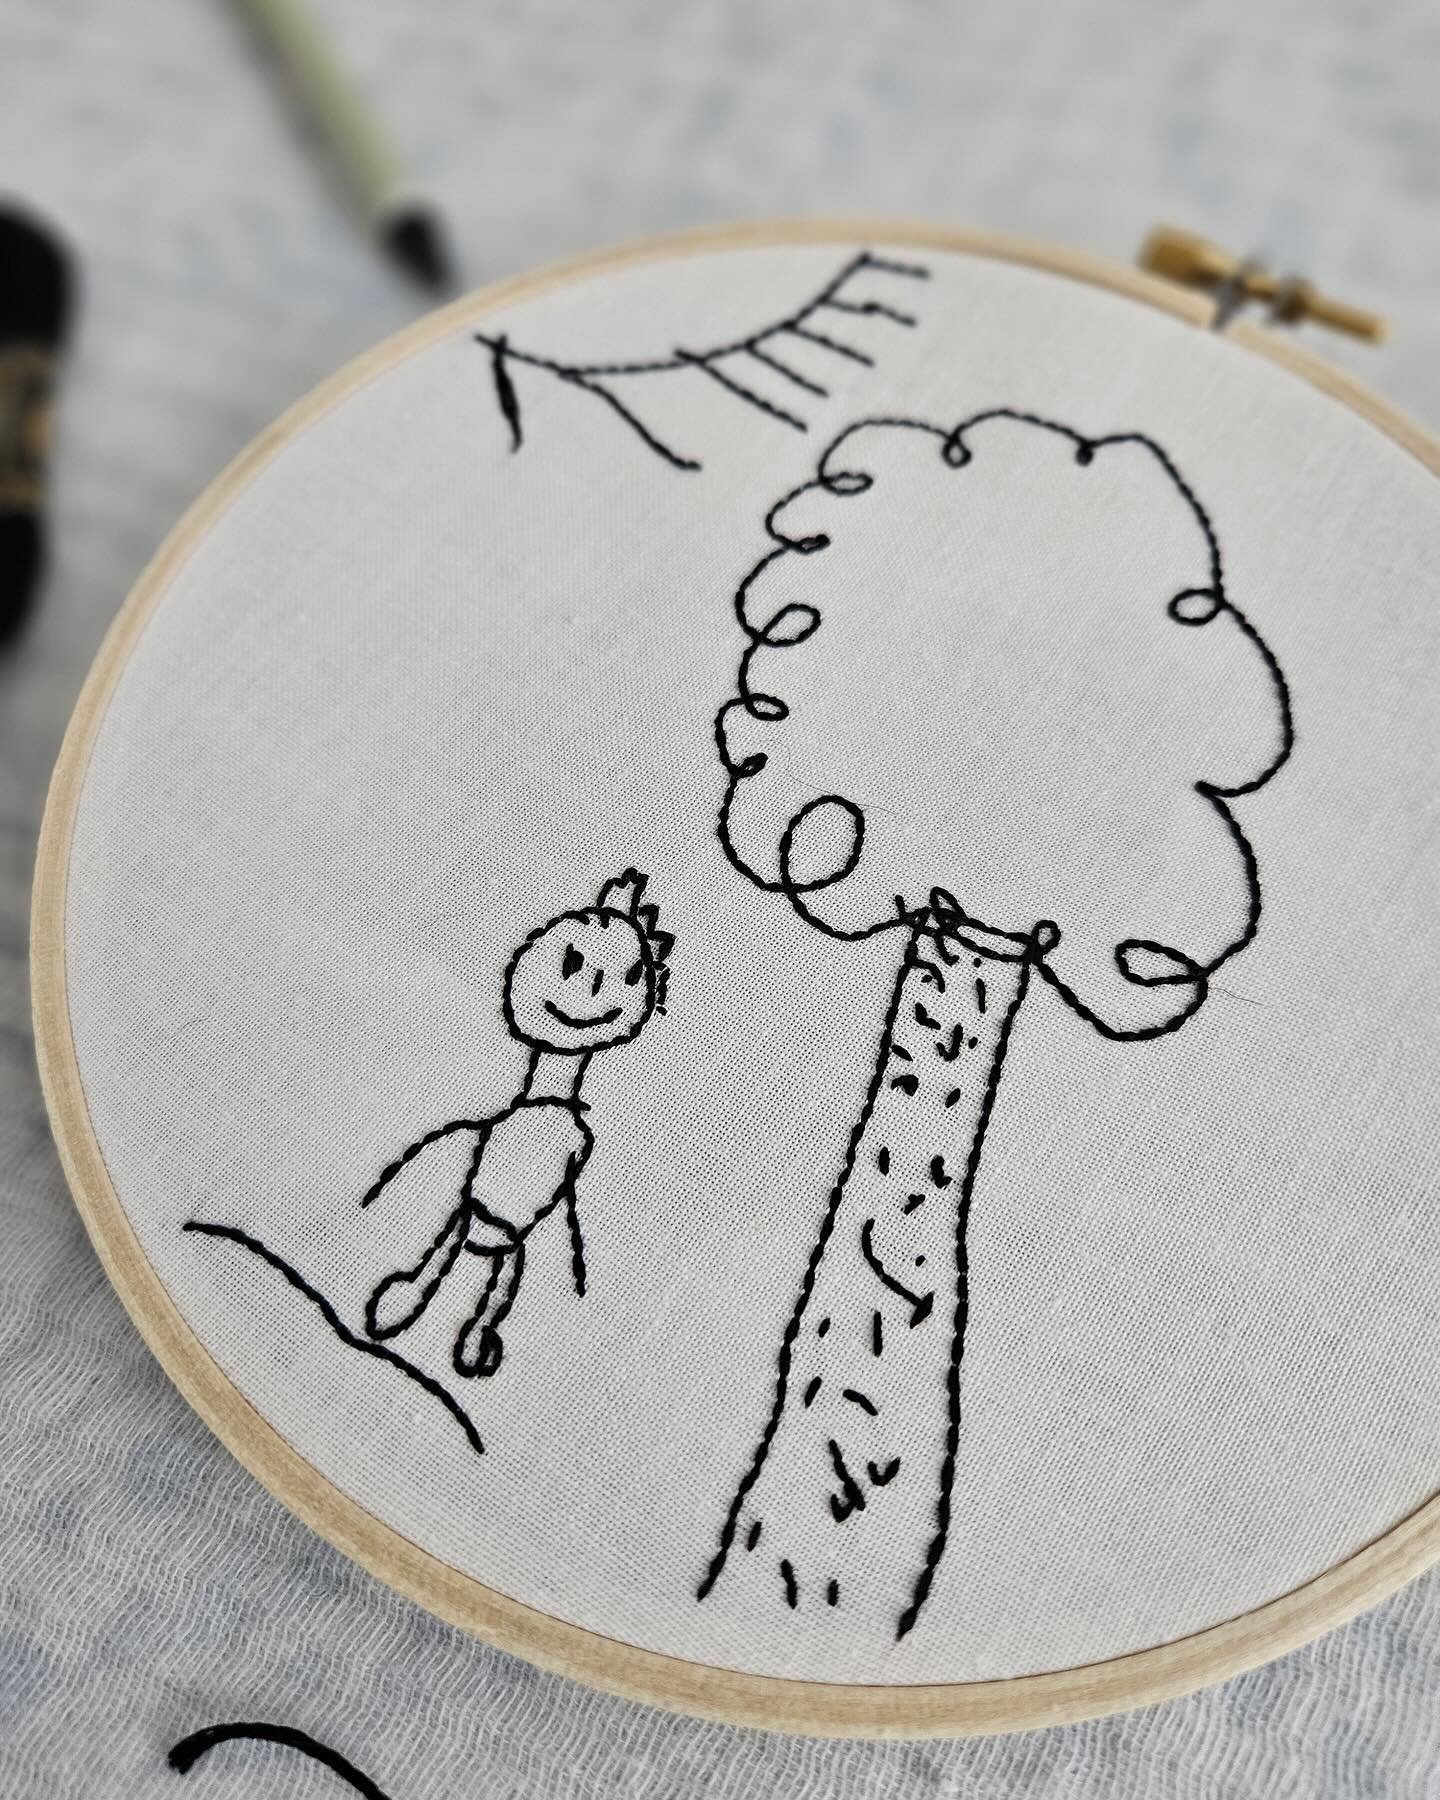 I&rsquo;m SOO excited for our next adult workshop! Molly from @offnalldesigns will have everything ready for you to embroider your child&rsquo;s artwork (or handwriting) into an adorable keepsake. Friday May 31 @ 6:30-8:30. Click my profile link and 